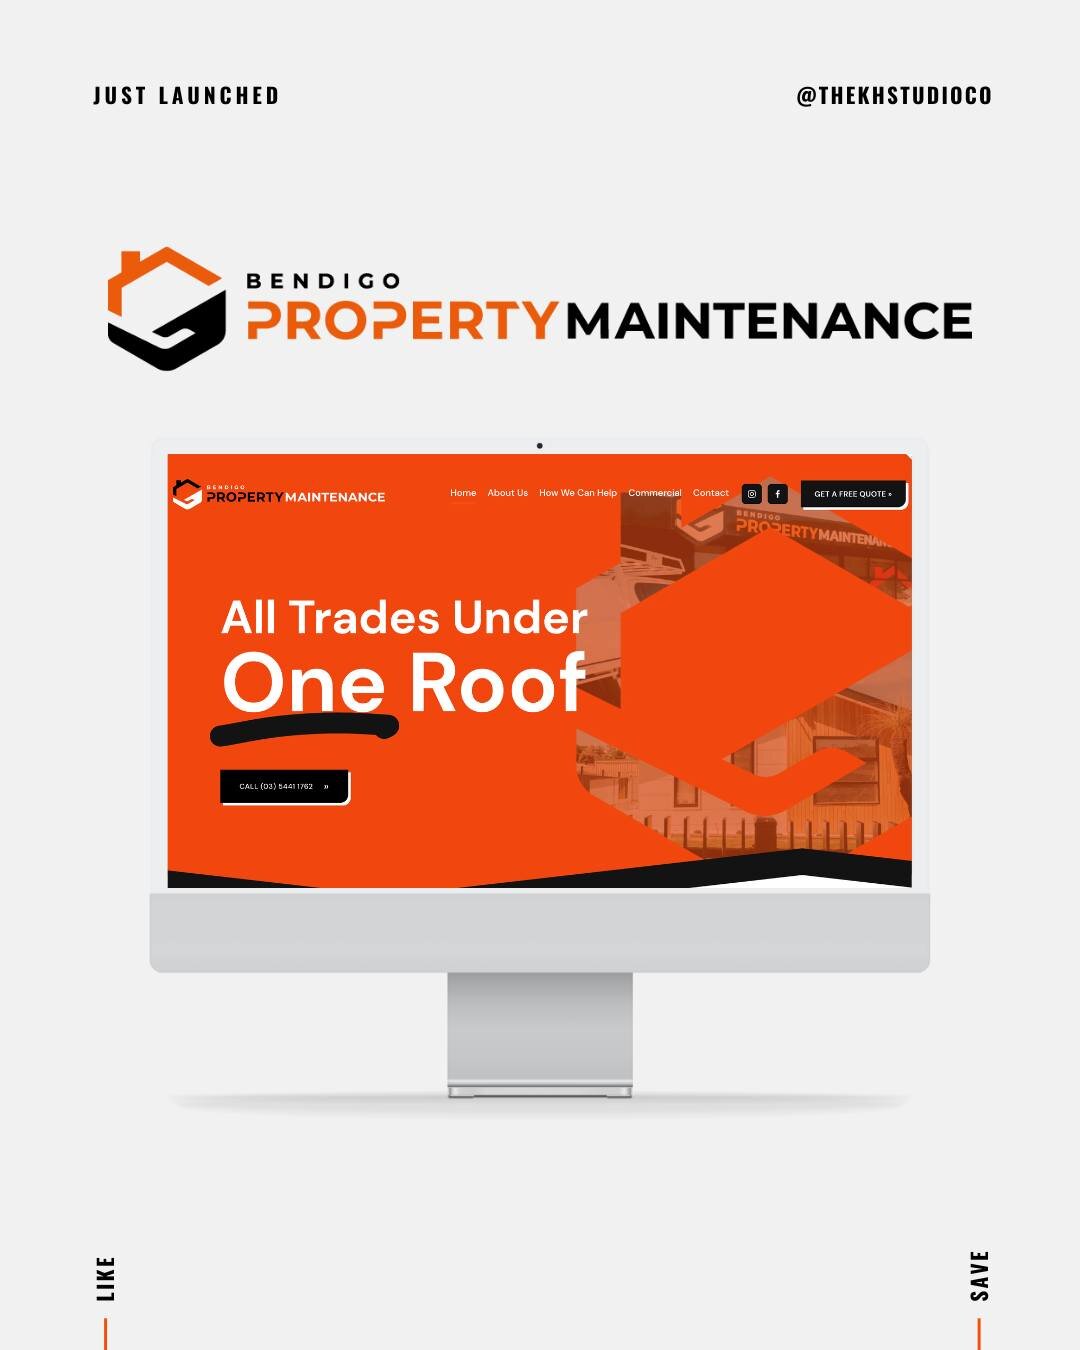 💥 JUST LAUNCHED // Jye, Ash and the team at Bendigo Property Maintenance were amazing to work with. They had absolute trust in the creative process from day one of the project planning to the finished website build. 

We were able to take their alre